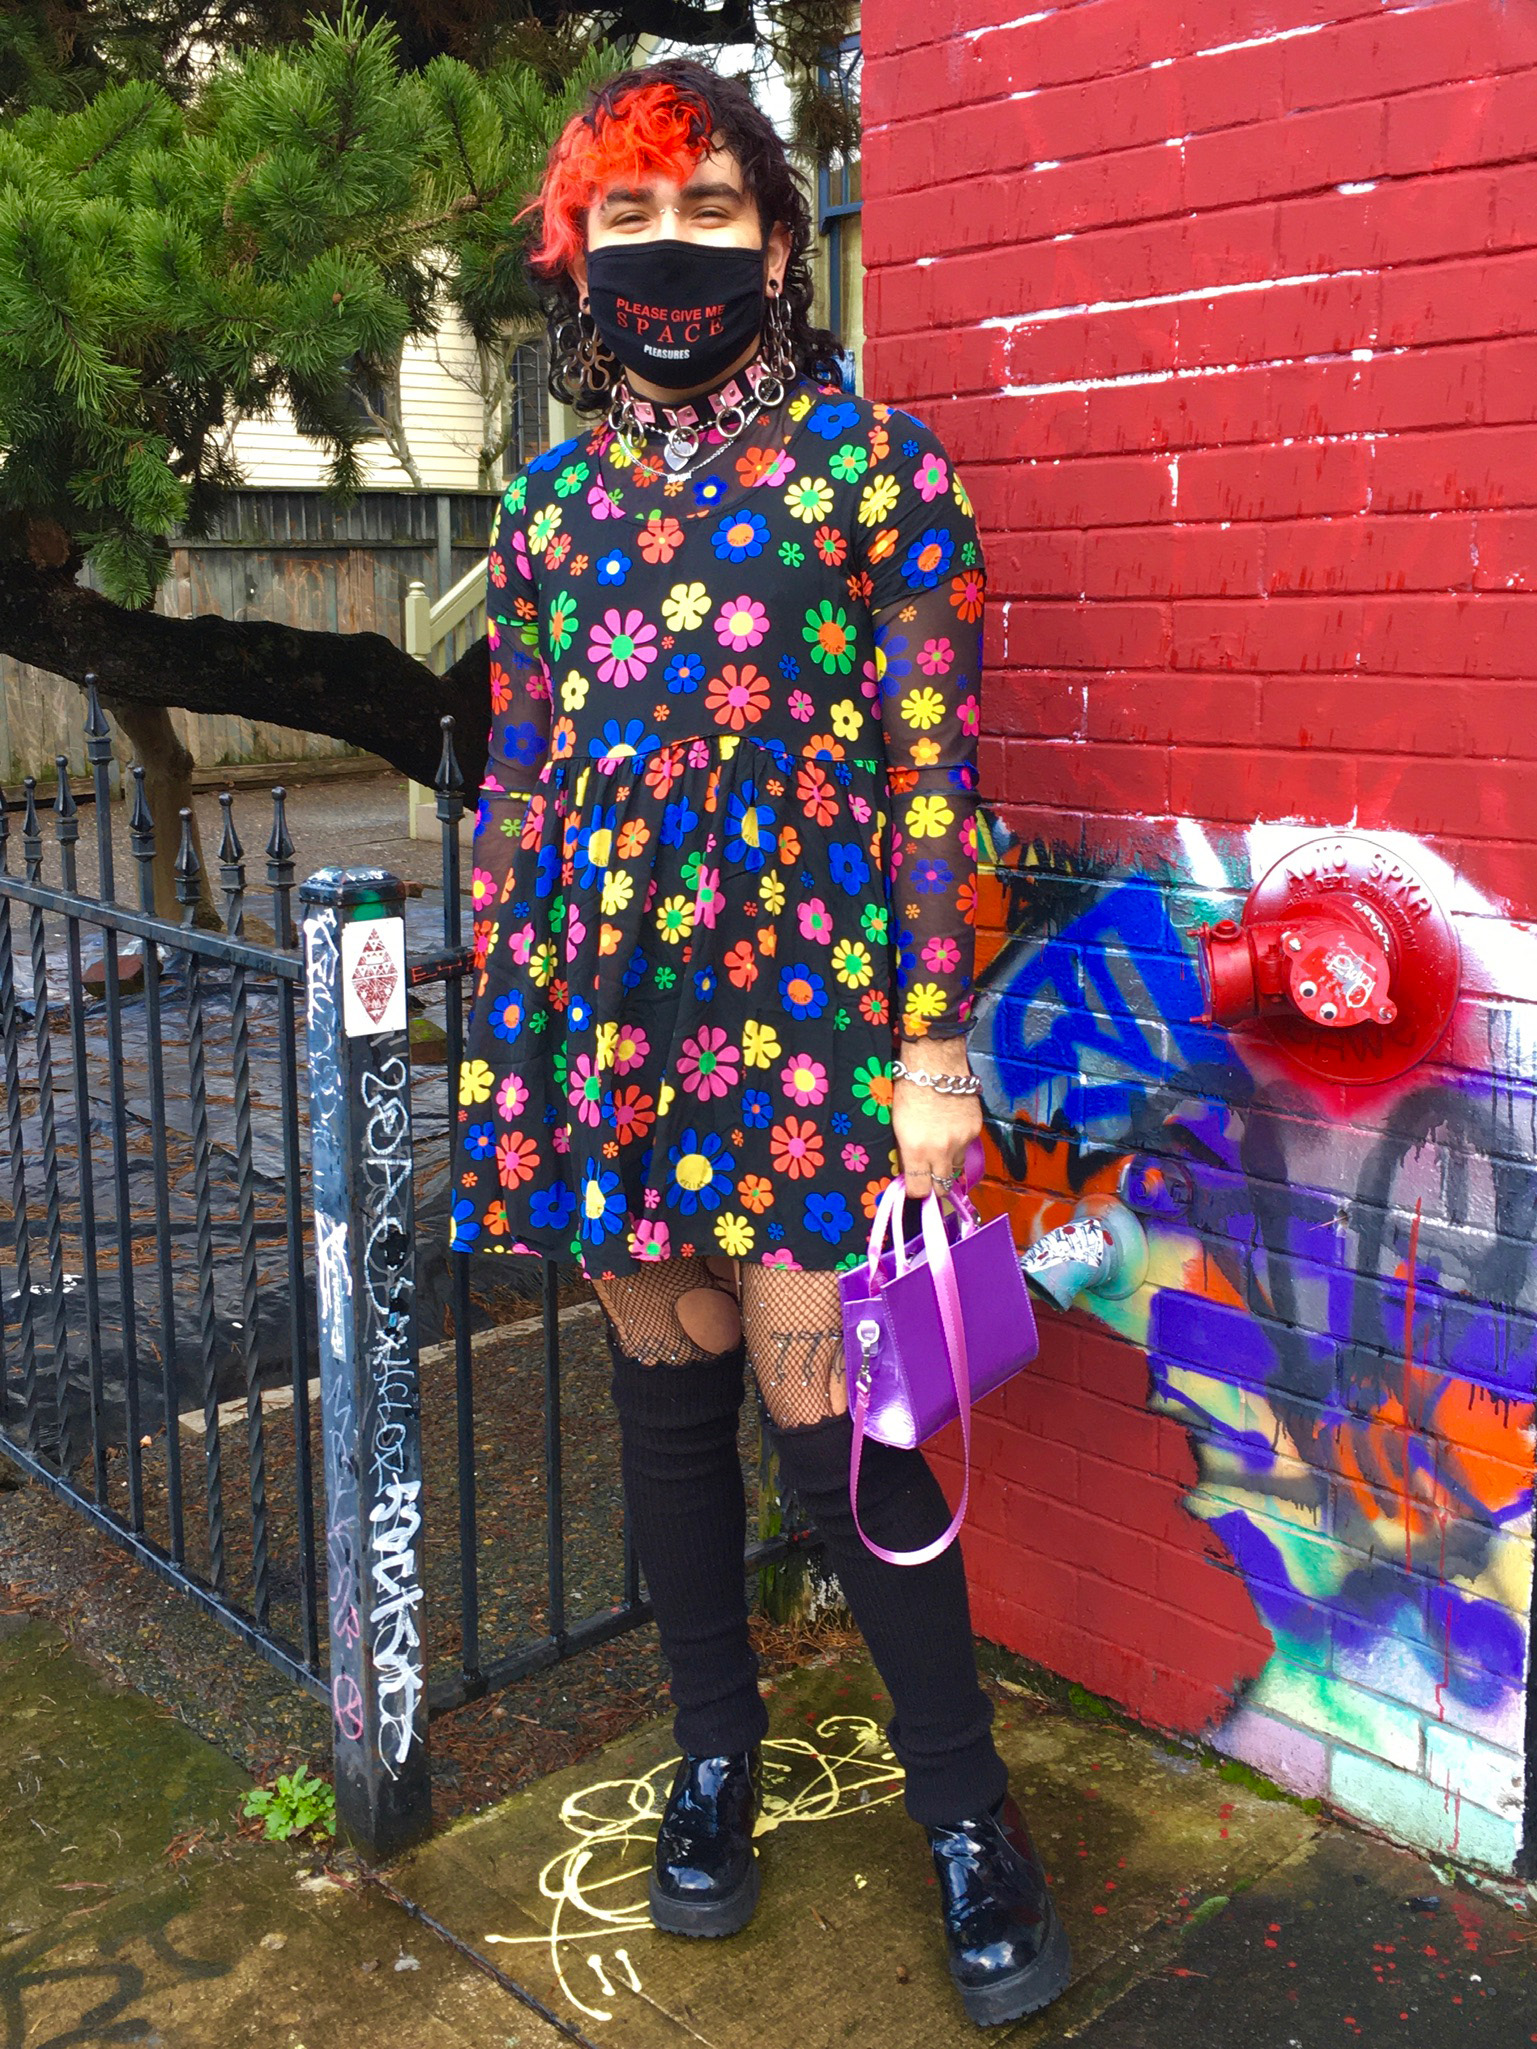 Person wearing black mesh dress with brightly colored flowers, distressed tights, purple satin handbag, and platform boots.